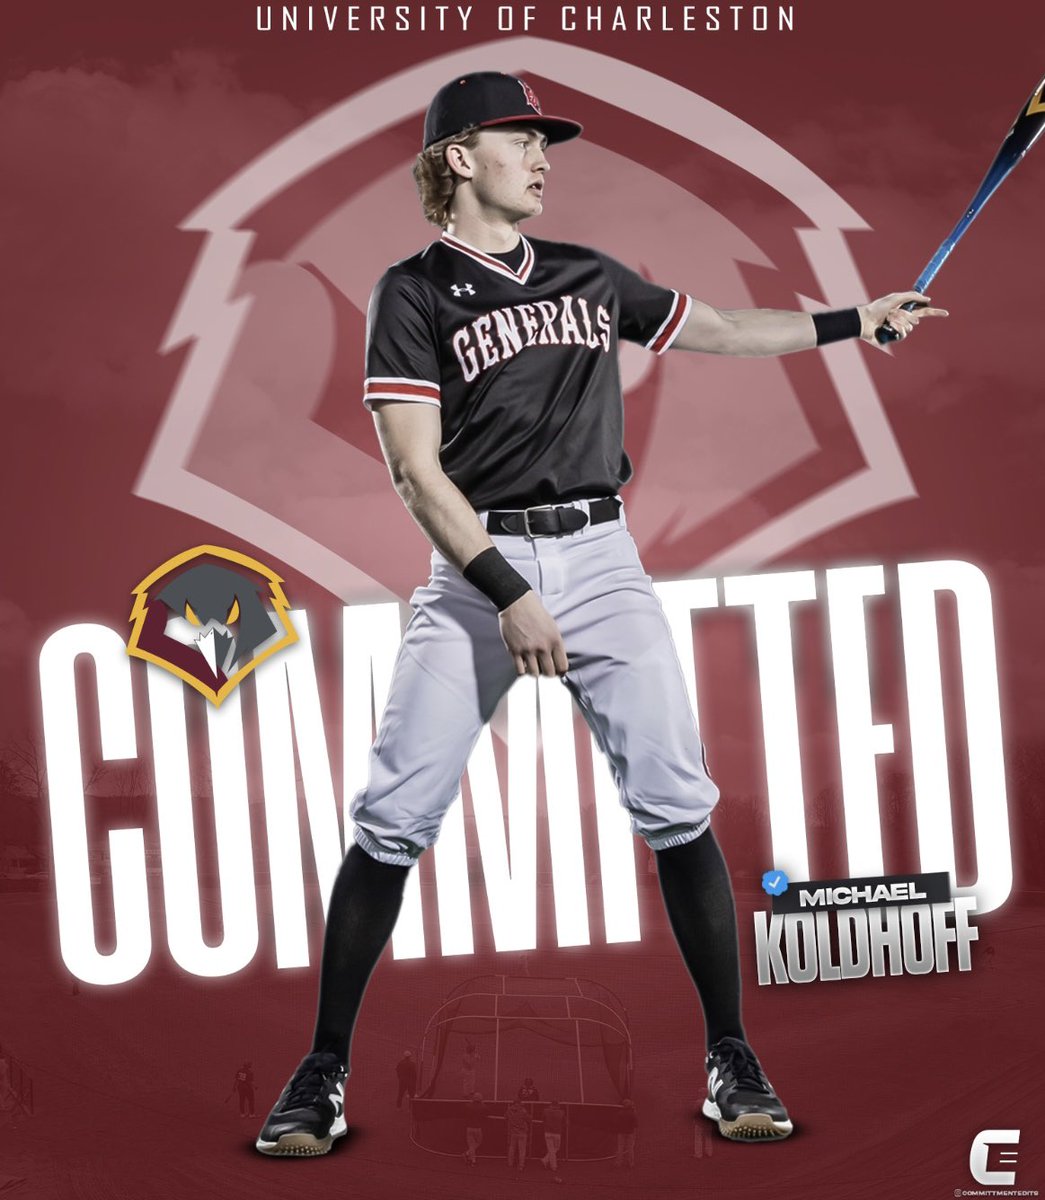 I am very excited to announce my verbal commitment to pursue my academic and athletic career at The University of Charleston! I would like to thank God, my family, coaches, teammates, and friends who have supported me though this journey! #RPE @CBWestBaseball @buckscobaseball